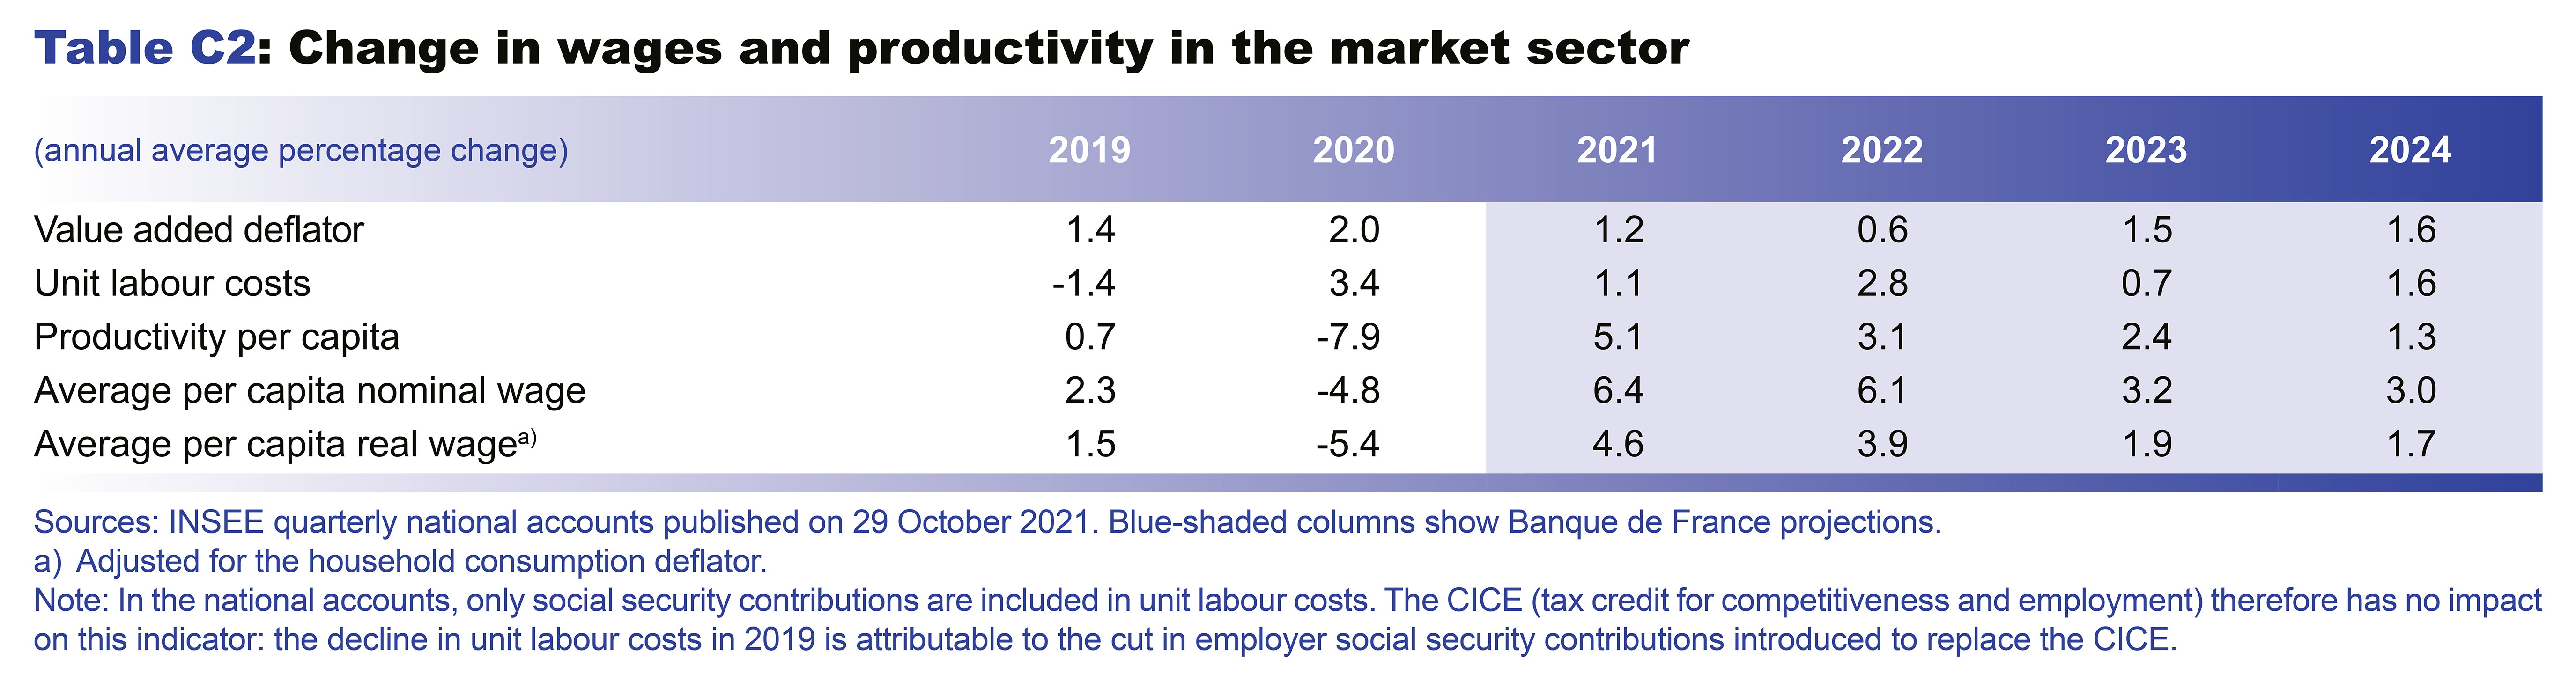 Macroeconomic projections – December 2021 - Change in wages and productivity in the market sector